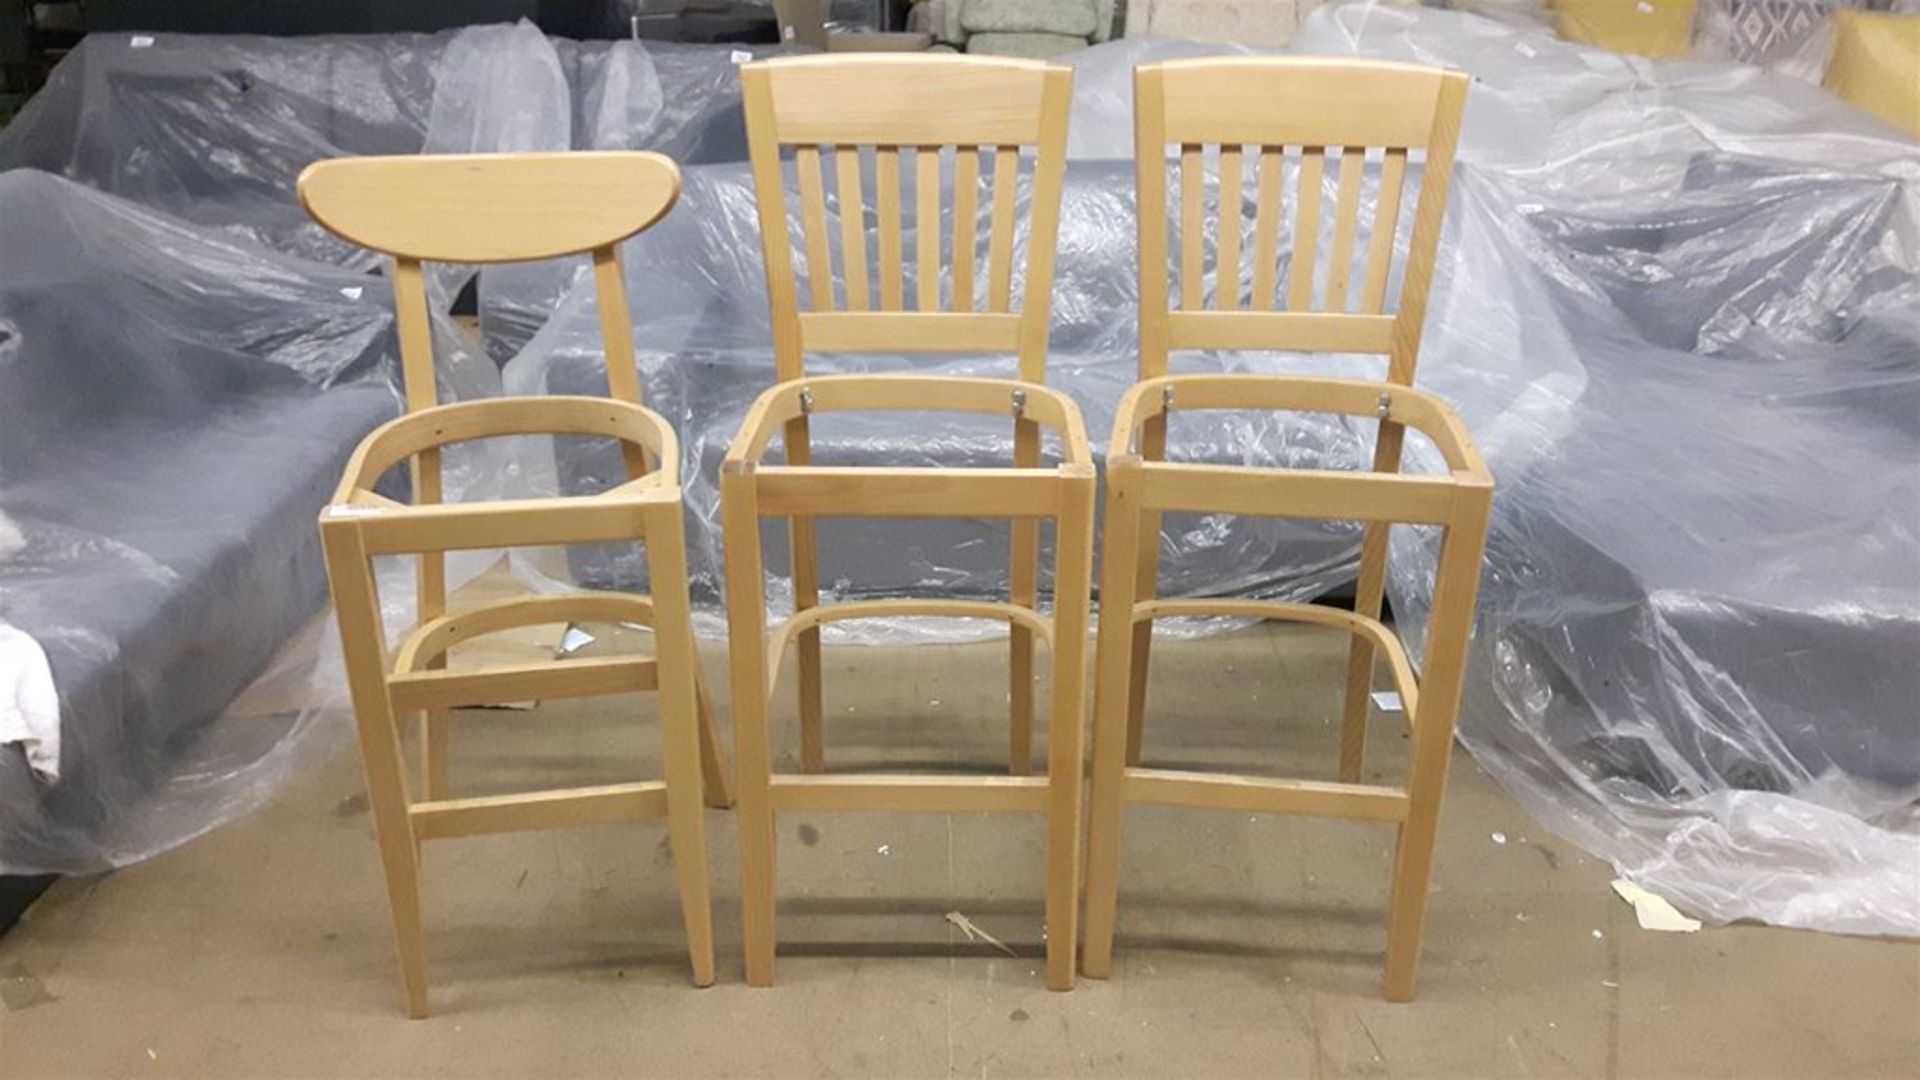 3 New old stock bar stools without seat pads.